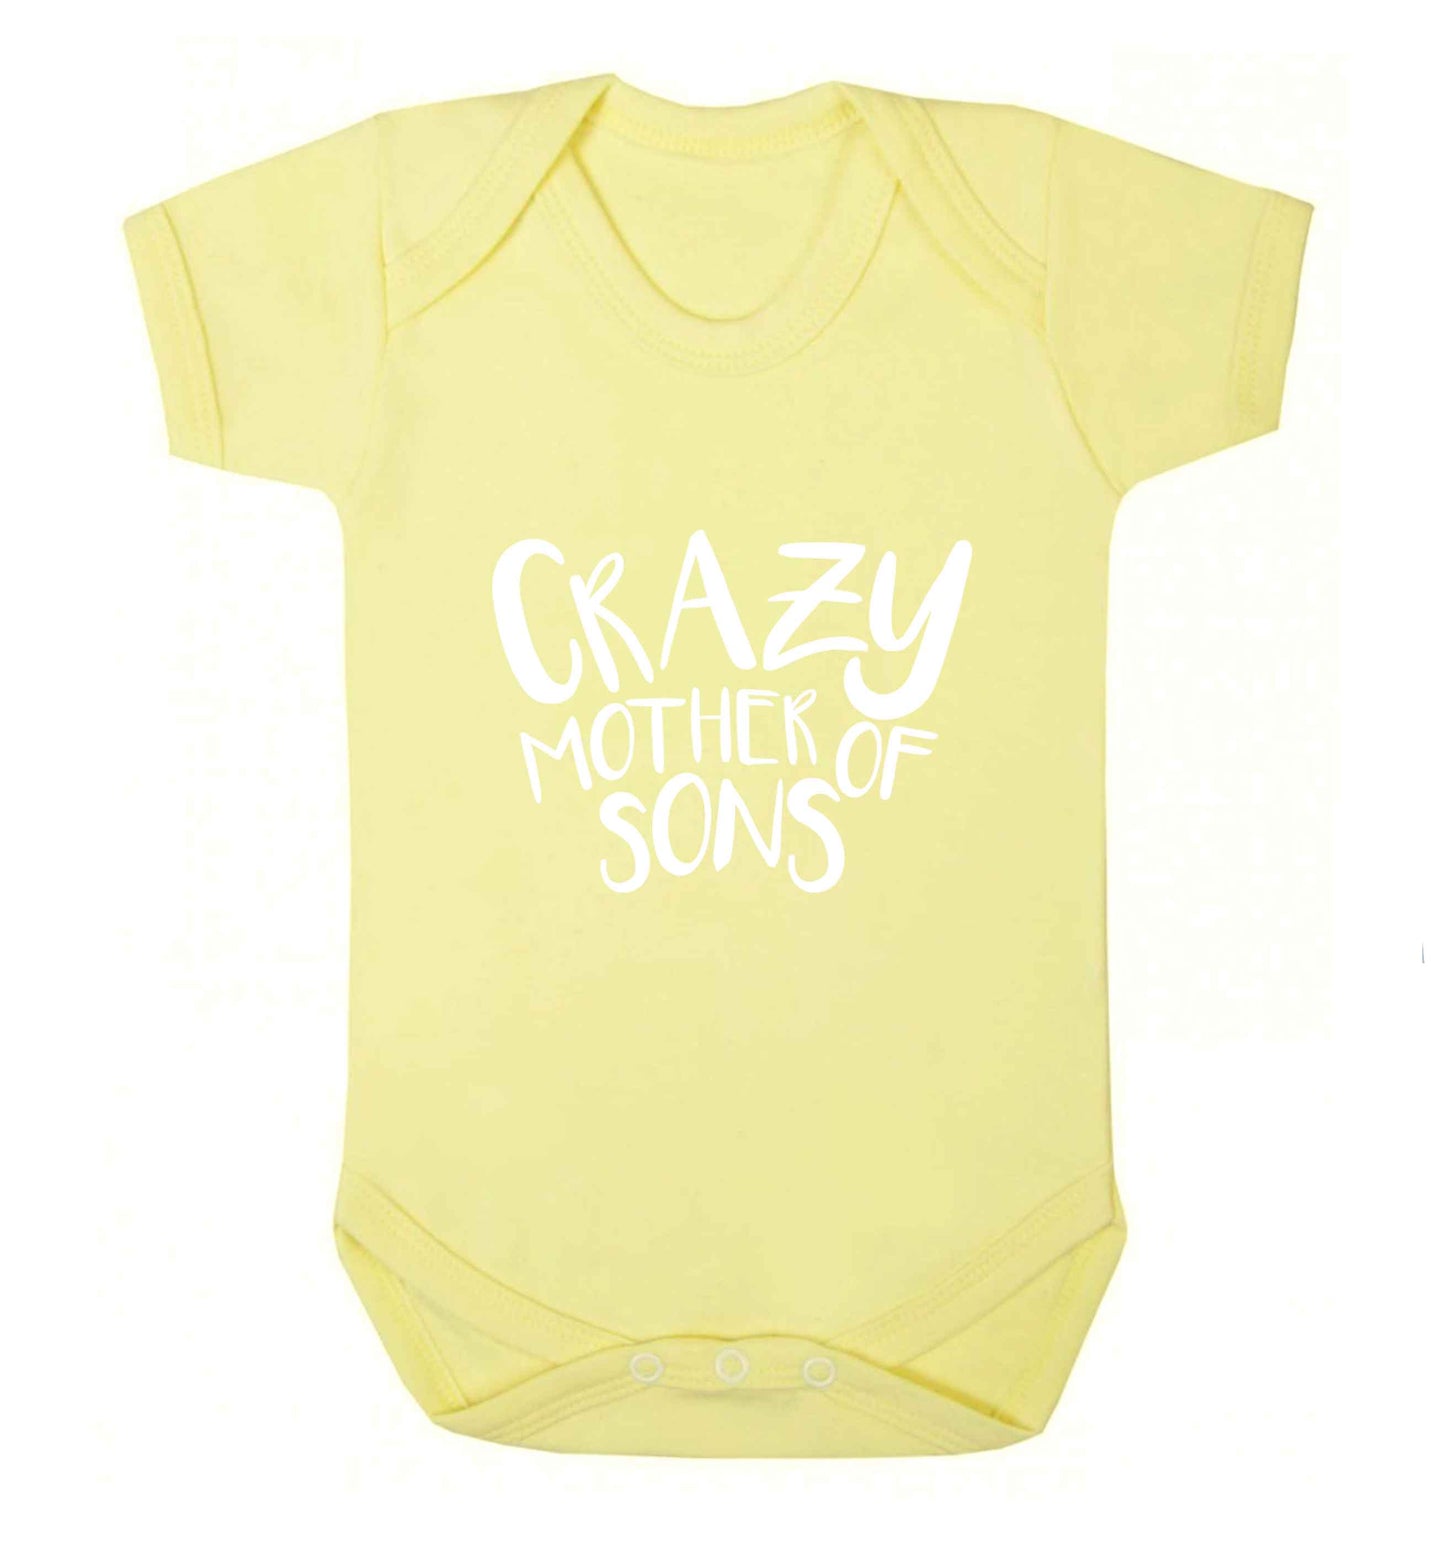 Crazy mother of sons baby vest pale yellow 18-24 months